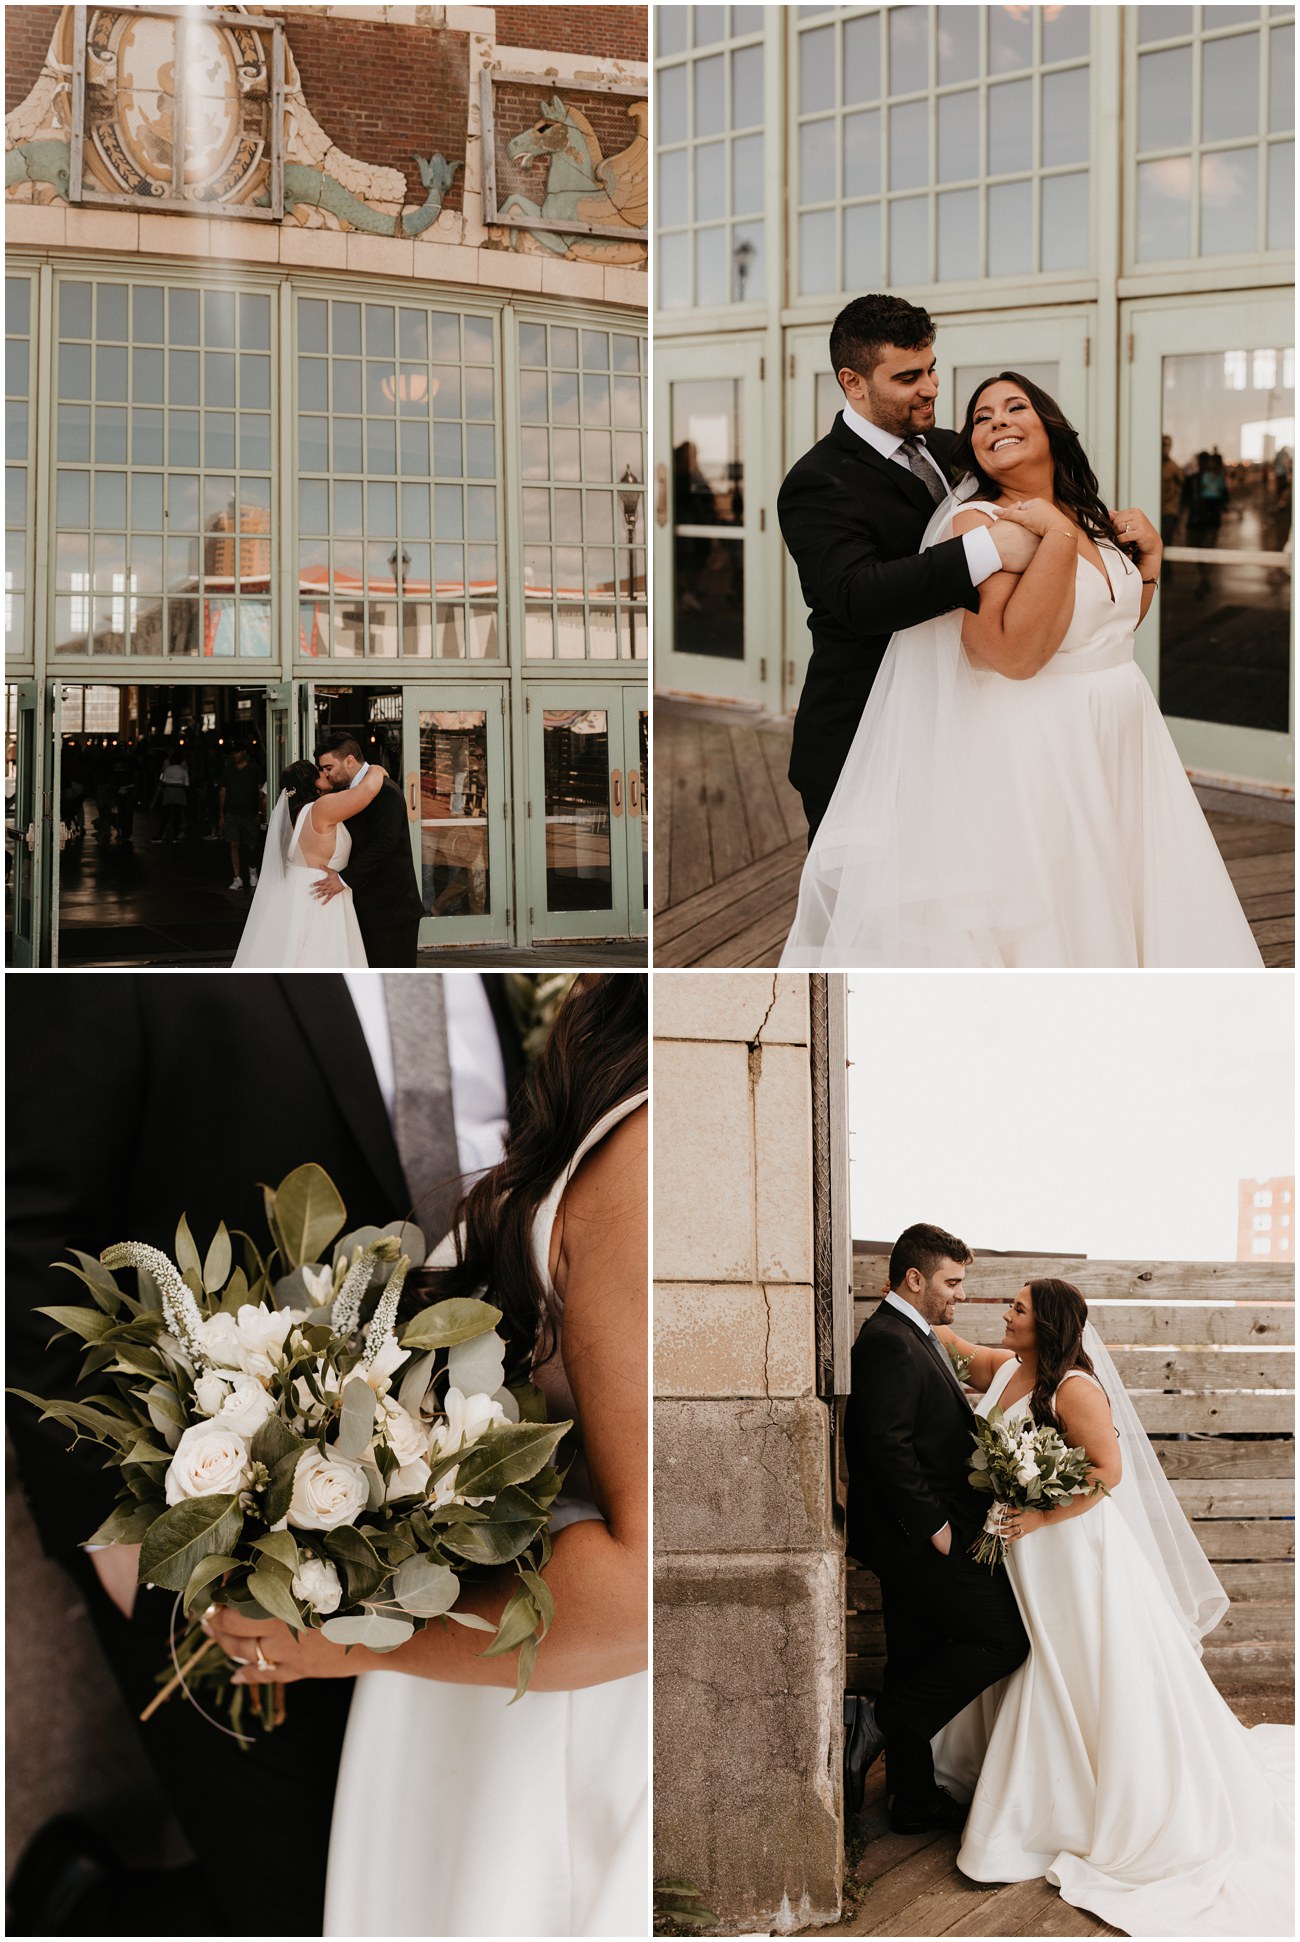 Collage of Bride and Groom on the Asbury Park boardwalk